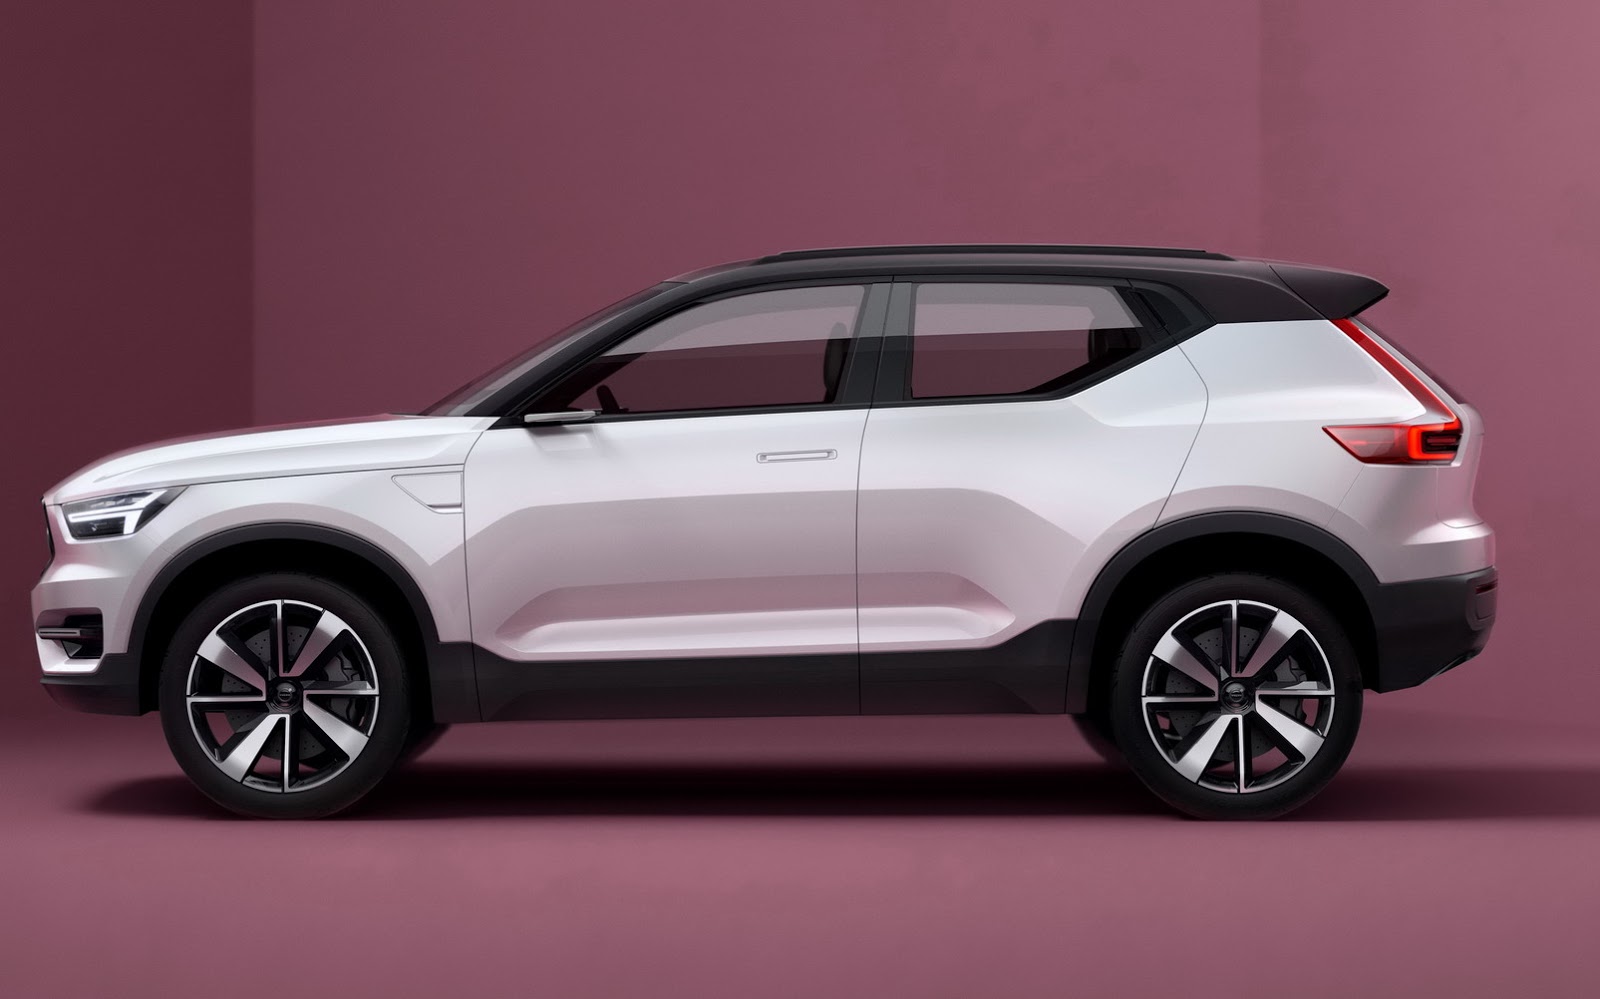 Concept Model of the Volvo XC40 at side